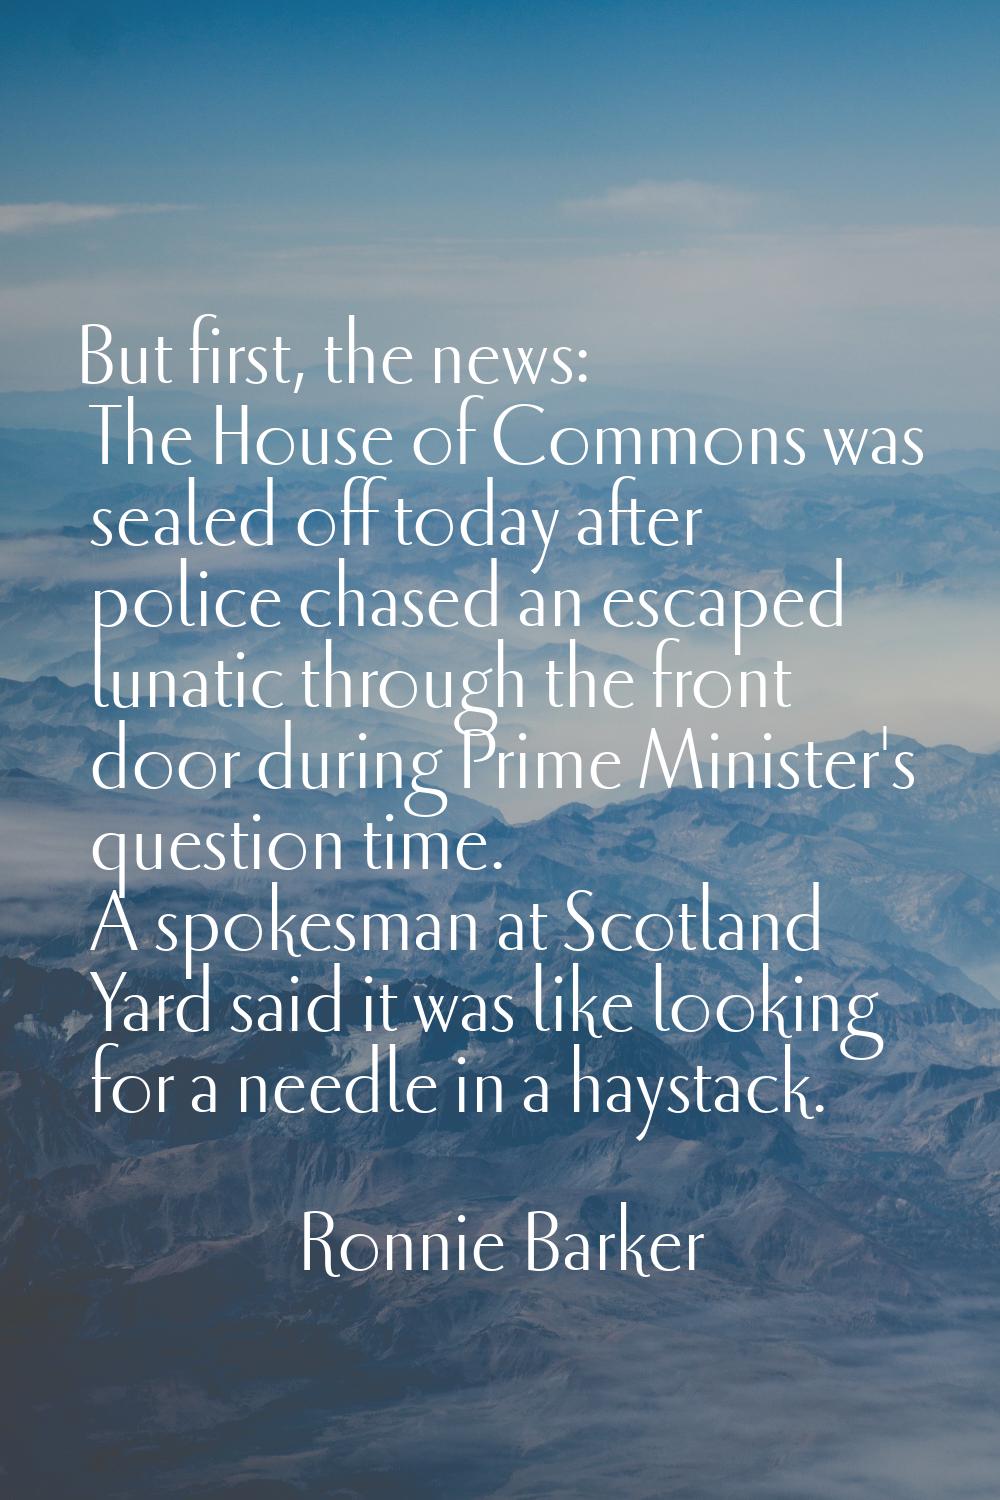 But first, the news: The House of Commons was sealed off today after police chased an escaped lunat